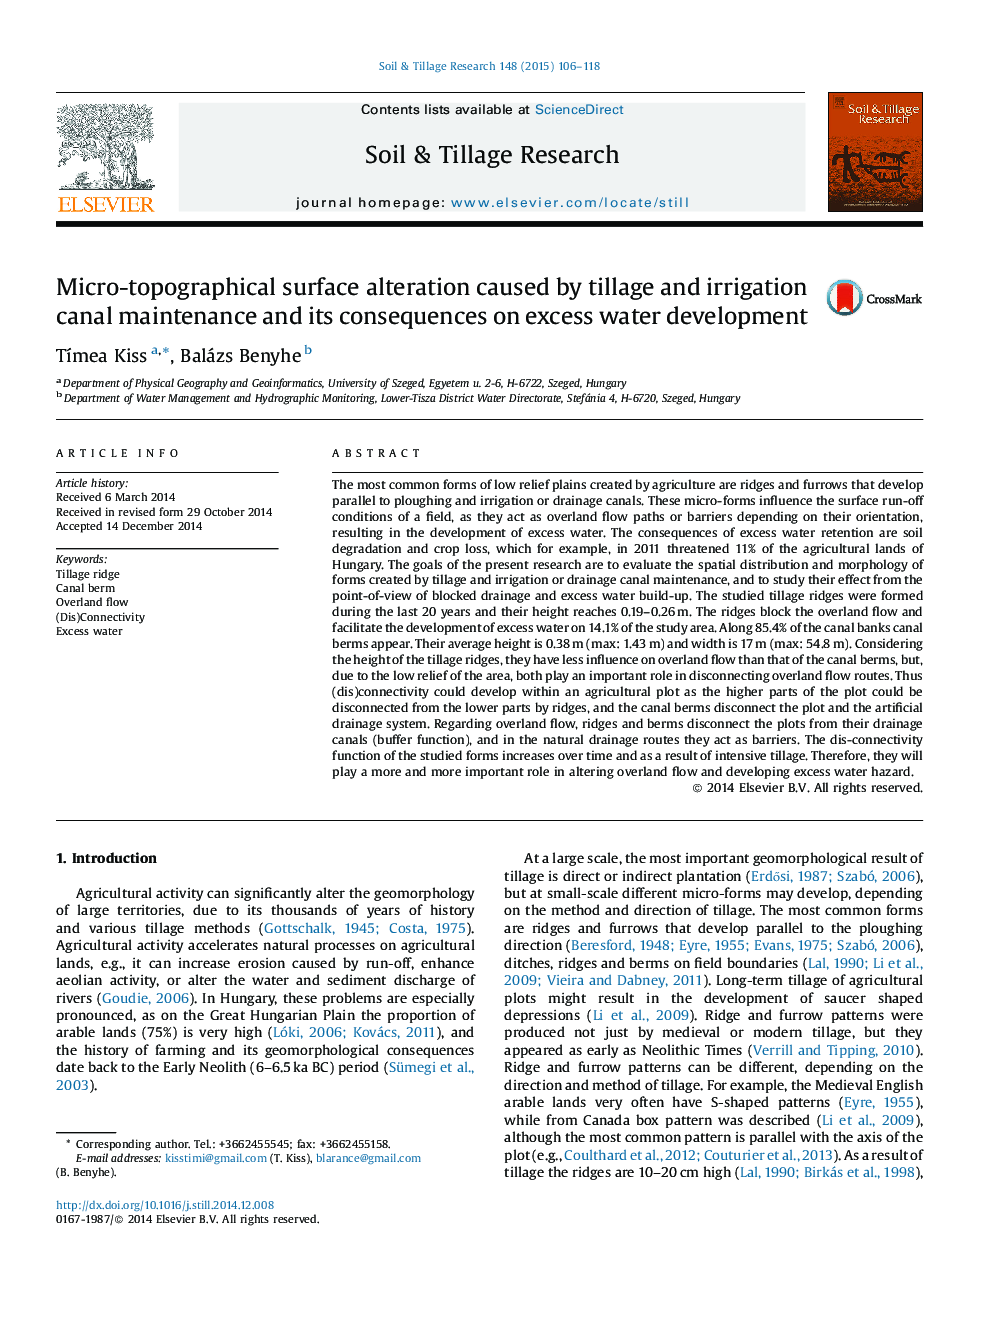 Micro-topographical surface alteration caused by tillage and irrigation canal maintenance and its consequences on excess water development